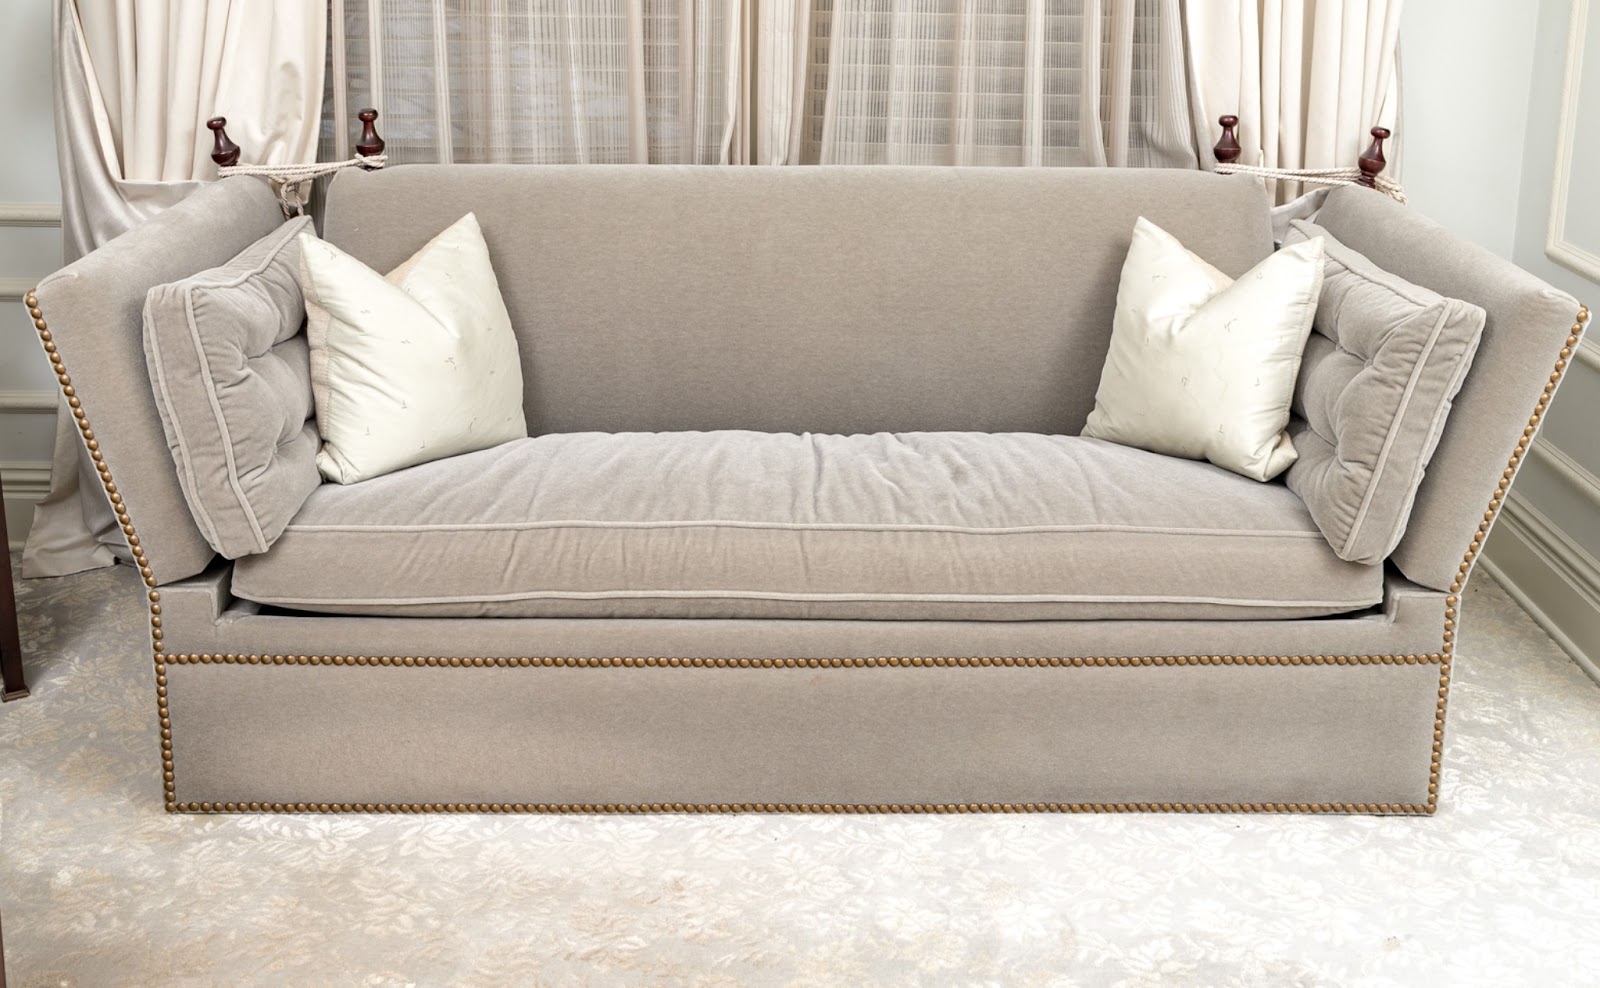 A light taupe-toned mohair upholstered sofa with drop-arms, nailhead trim, and upholstered pillows